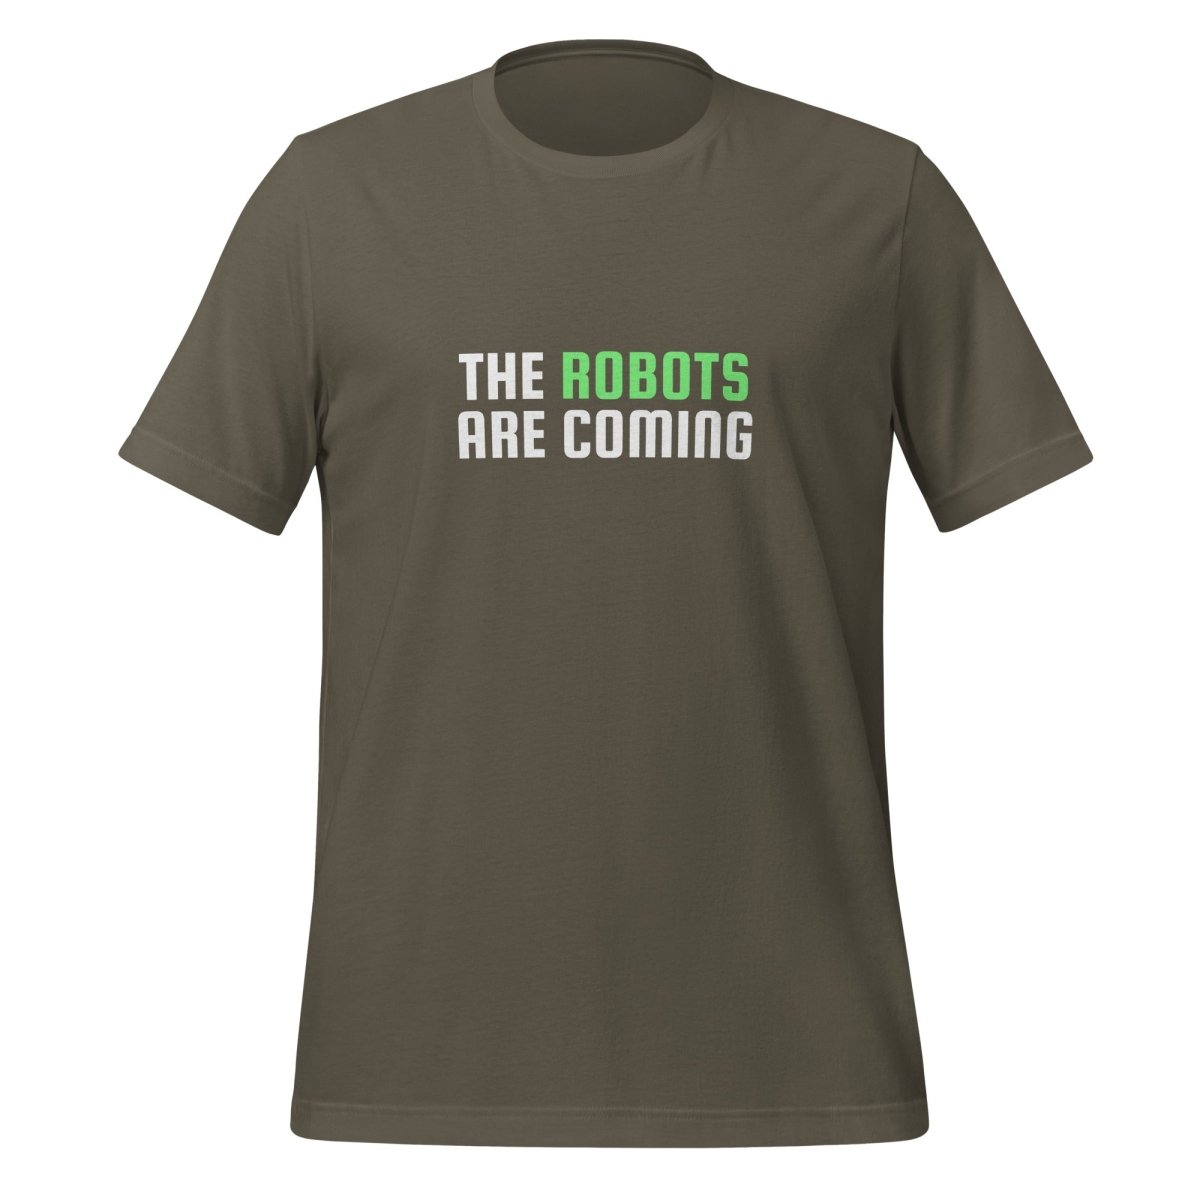 The Robots Are Coming (Green) T - Shirt 2 (unisex) - Army - AI Store